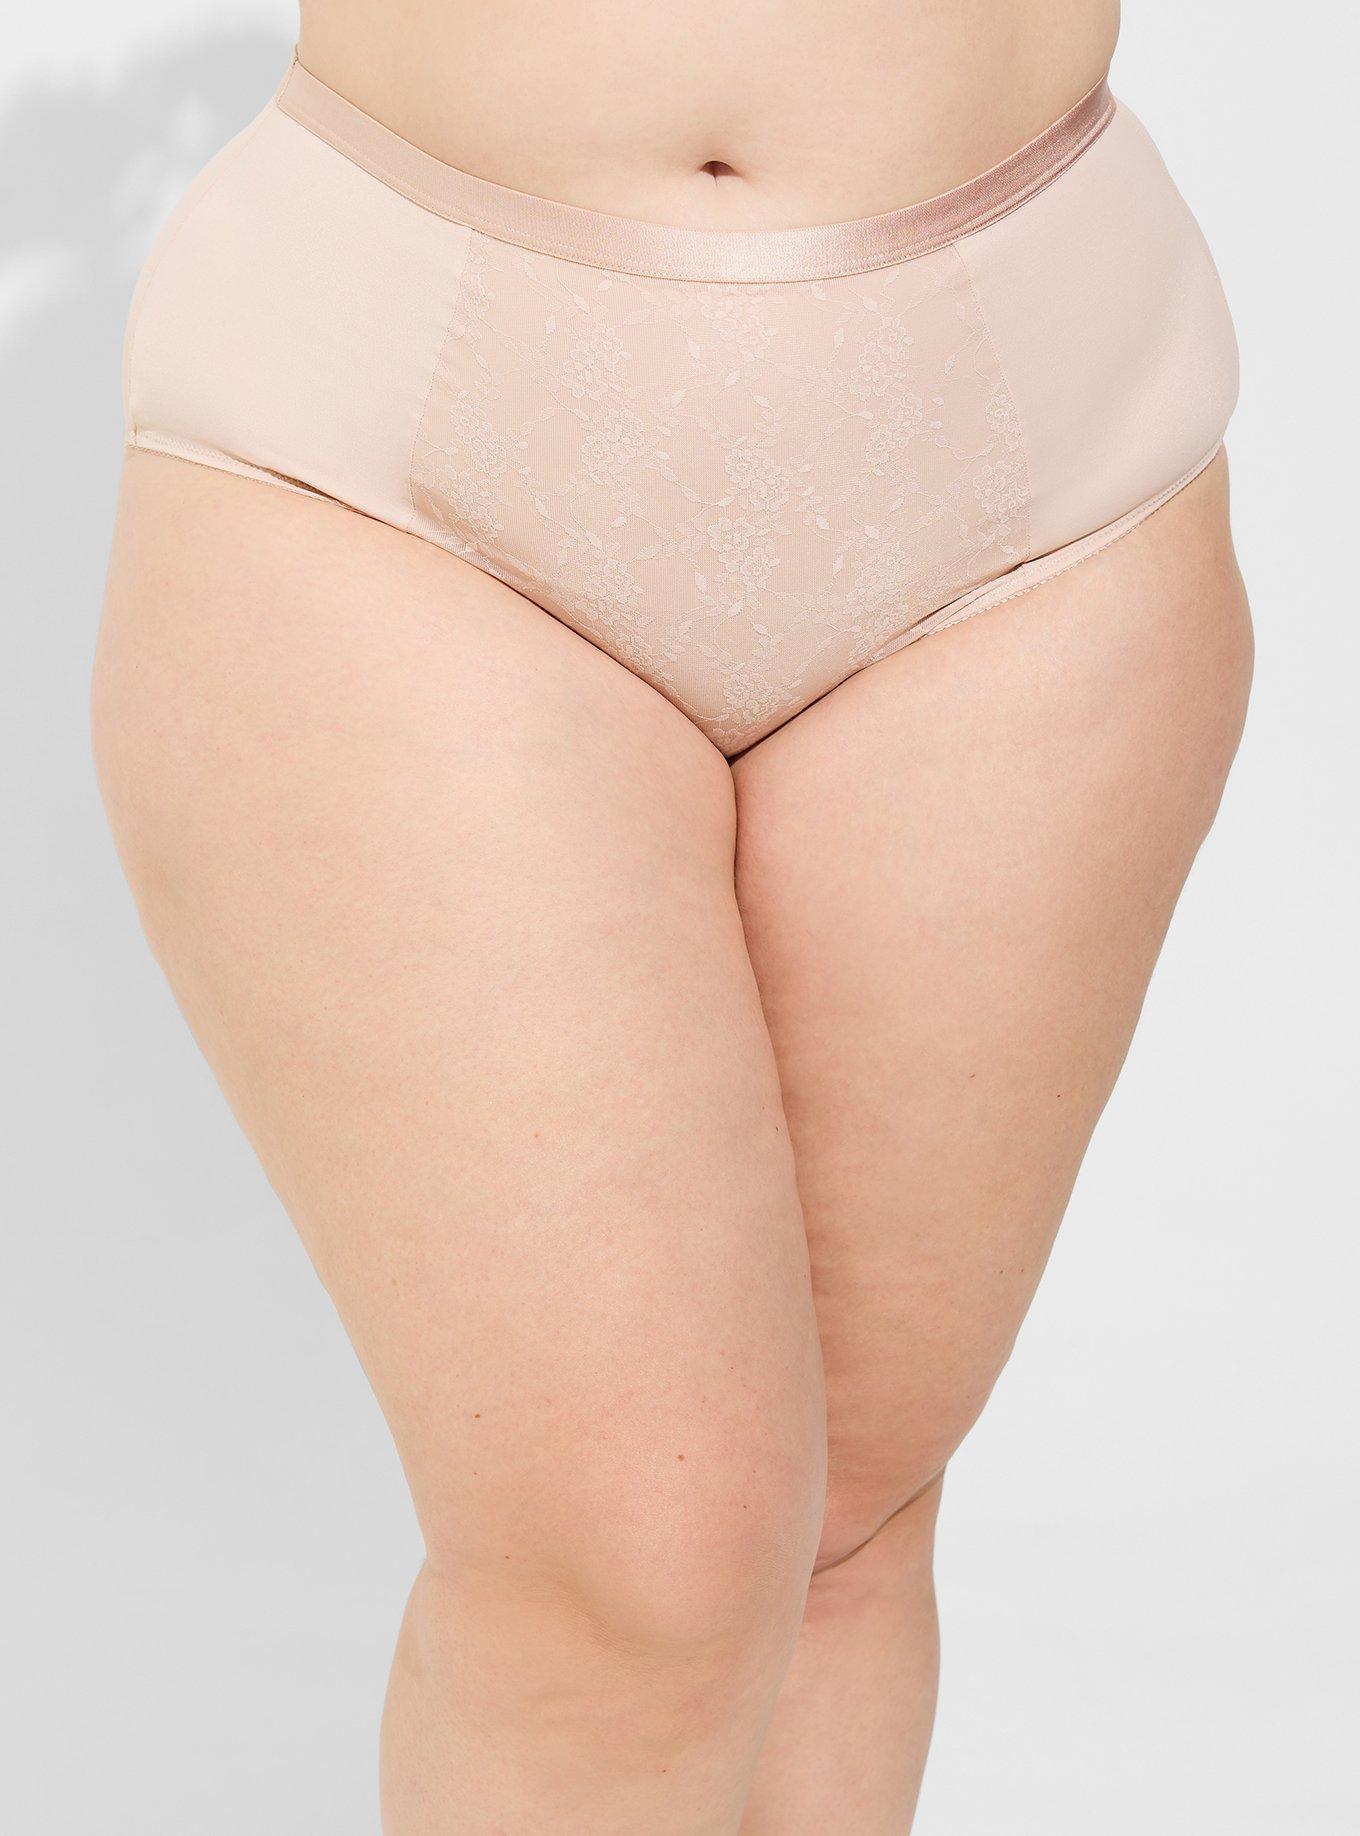 Women's Panties Underwear Brief Or High Cut 4X To 6X Plus Size